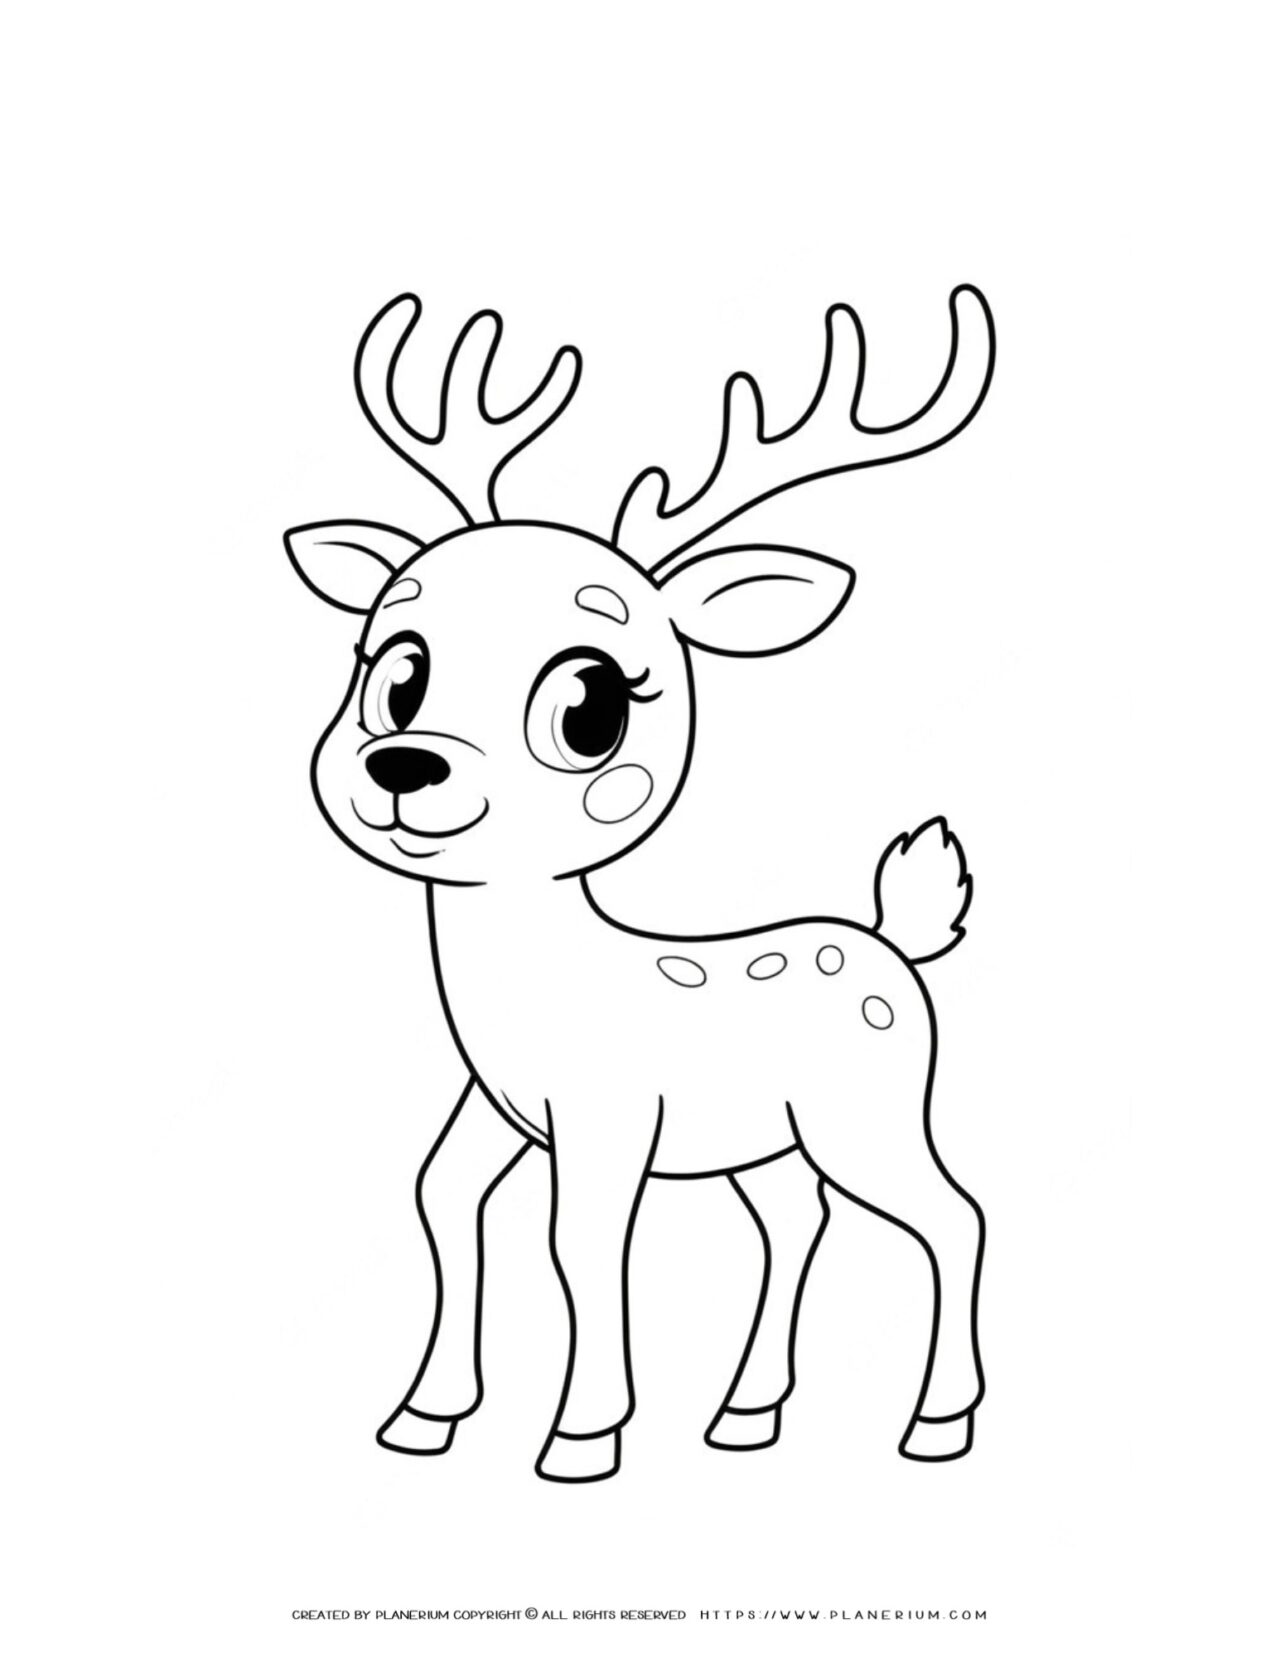 happy-reindeer-outline-simple-coloring-page-for-kids